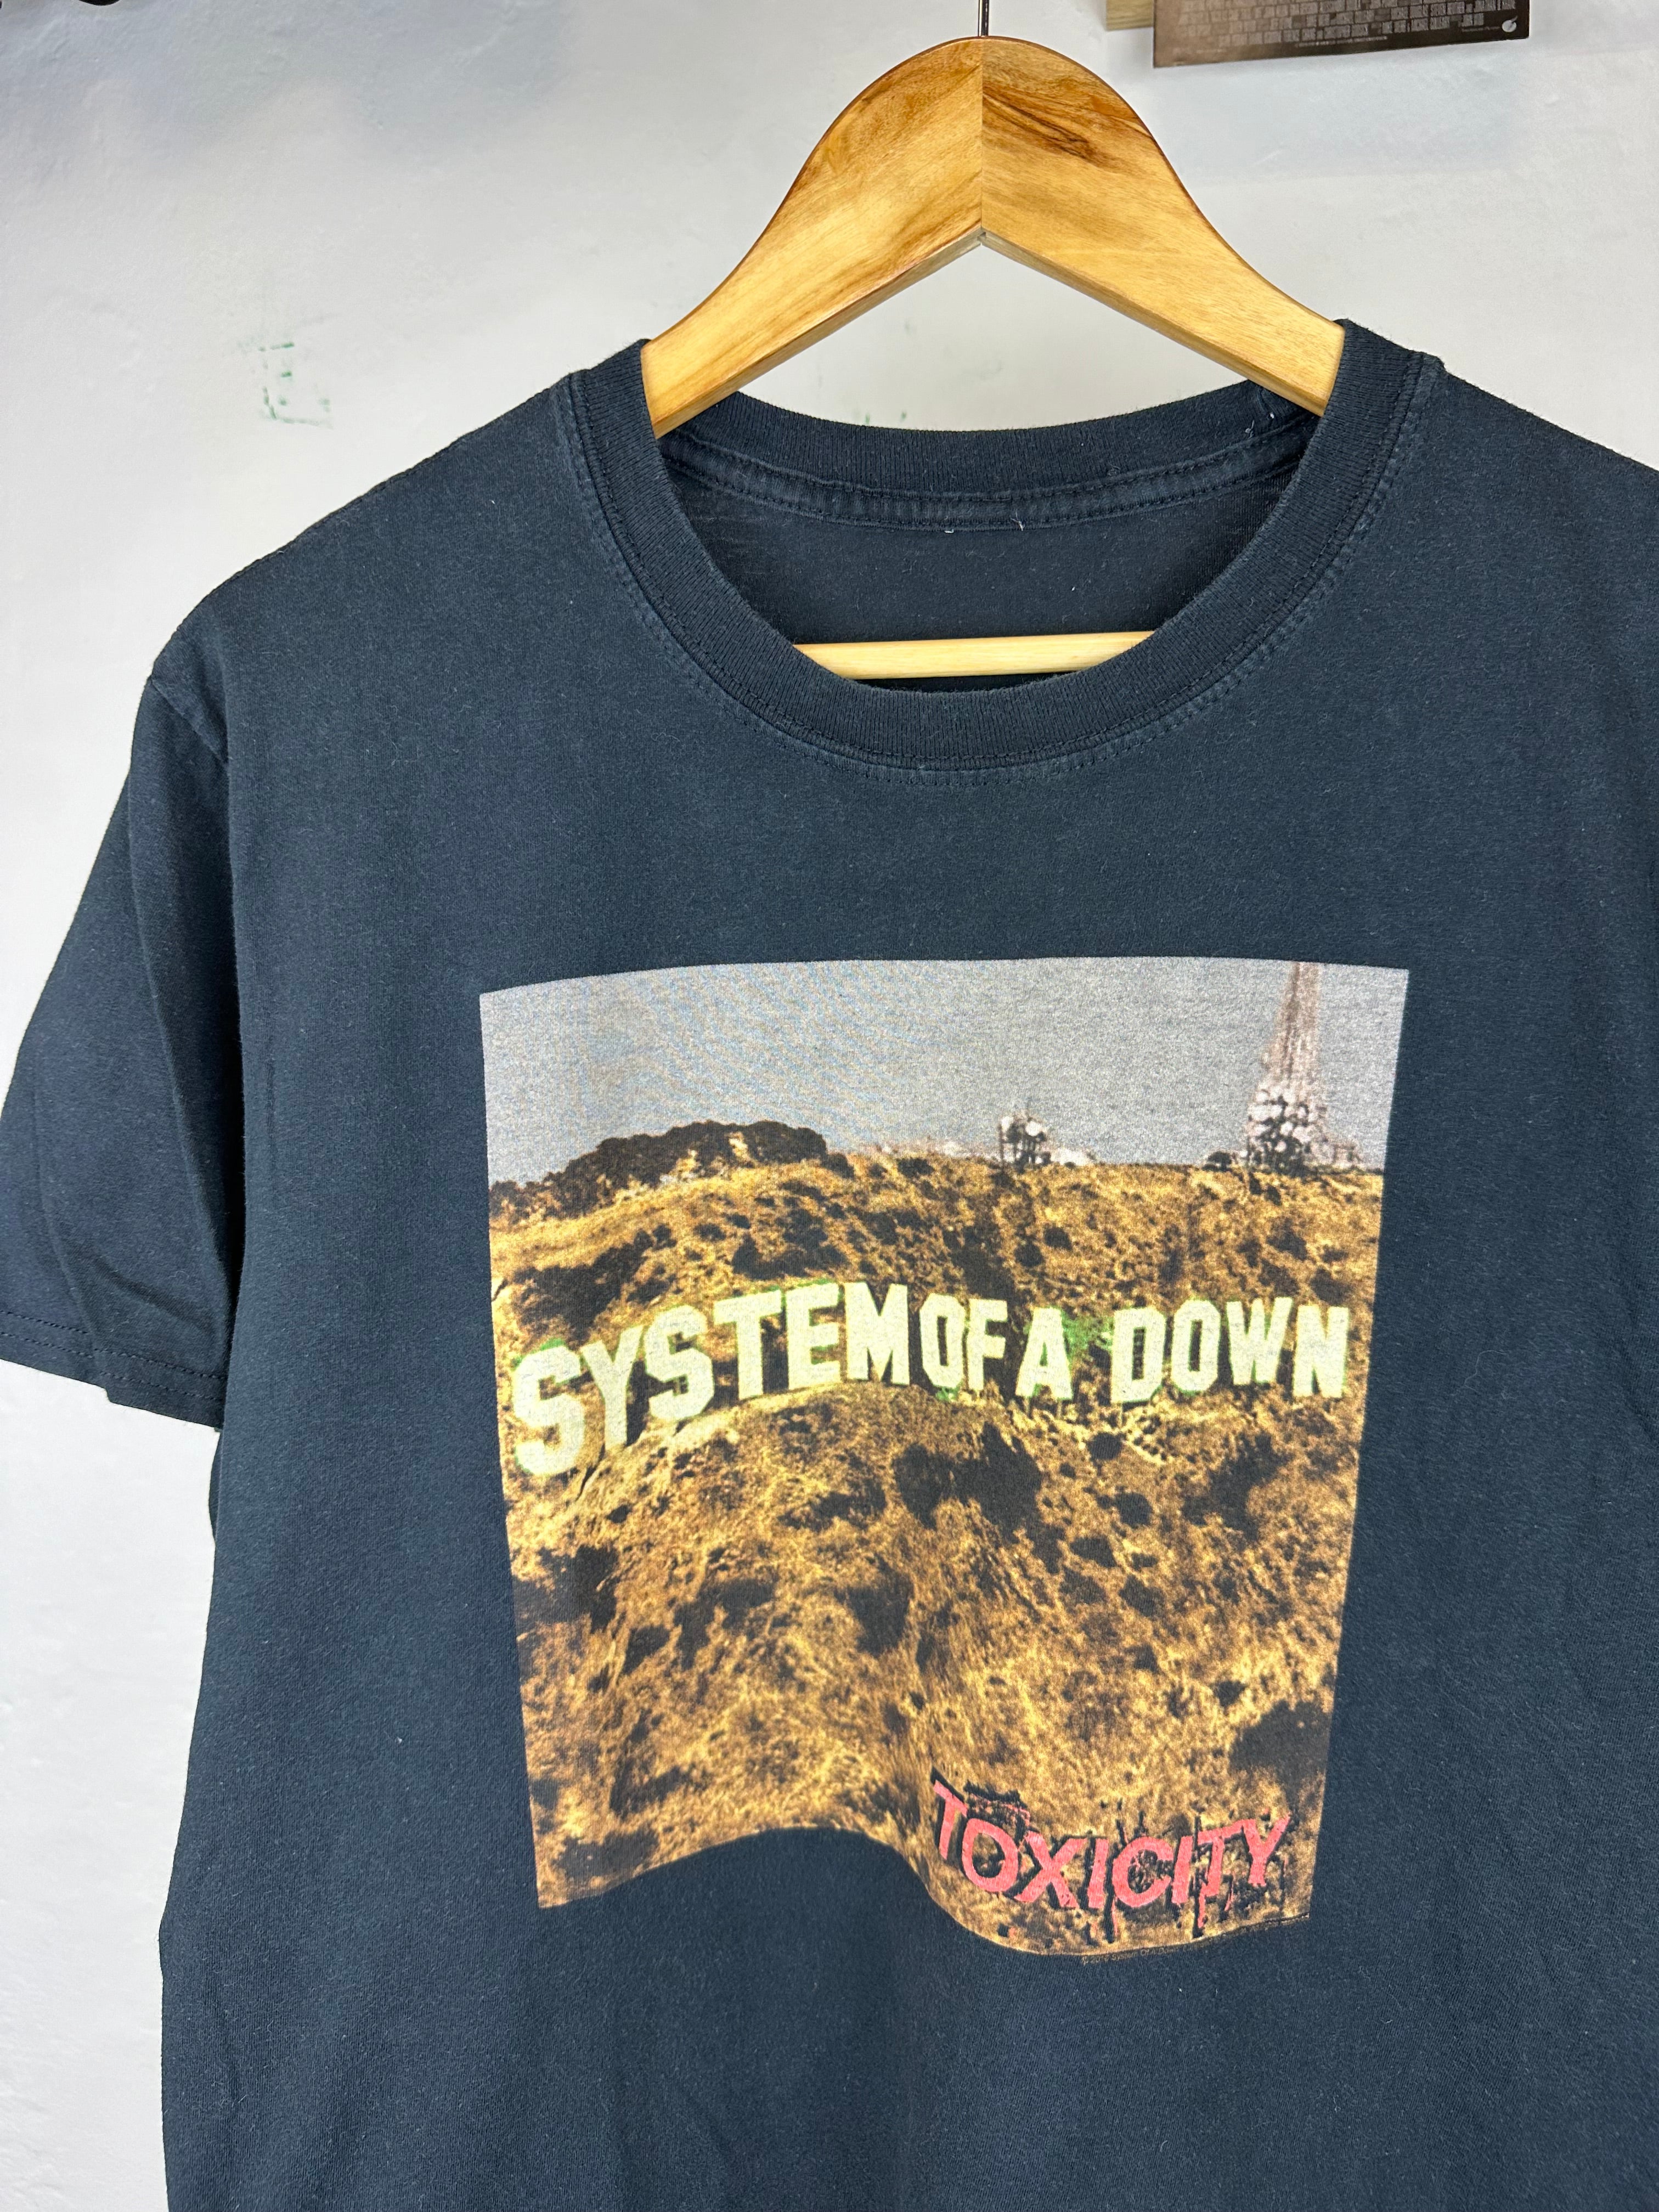 Vintage System of a Down t-shirt - size L